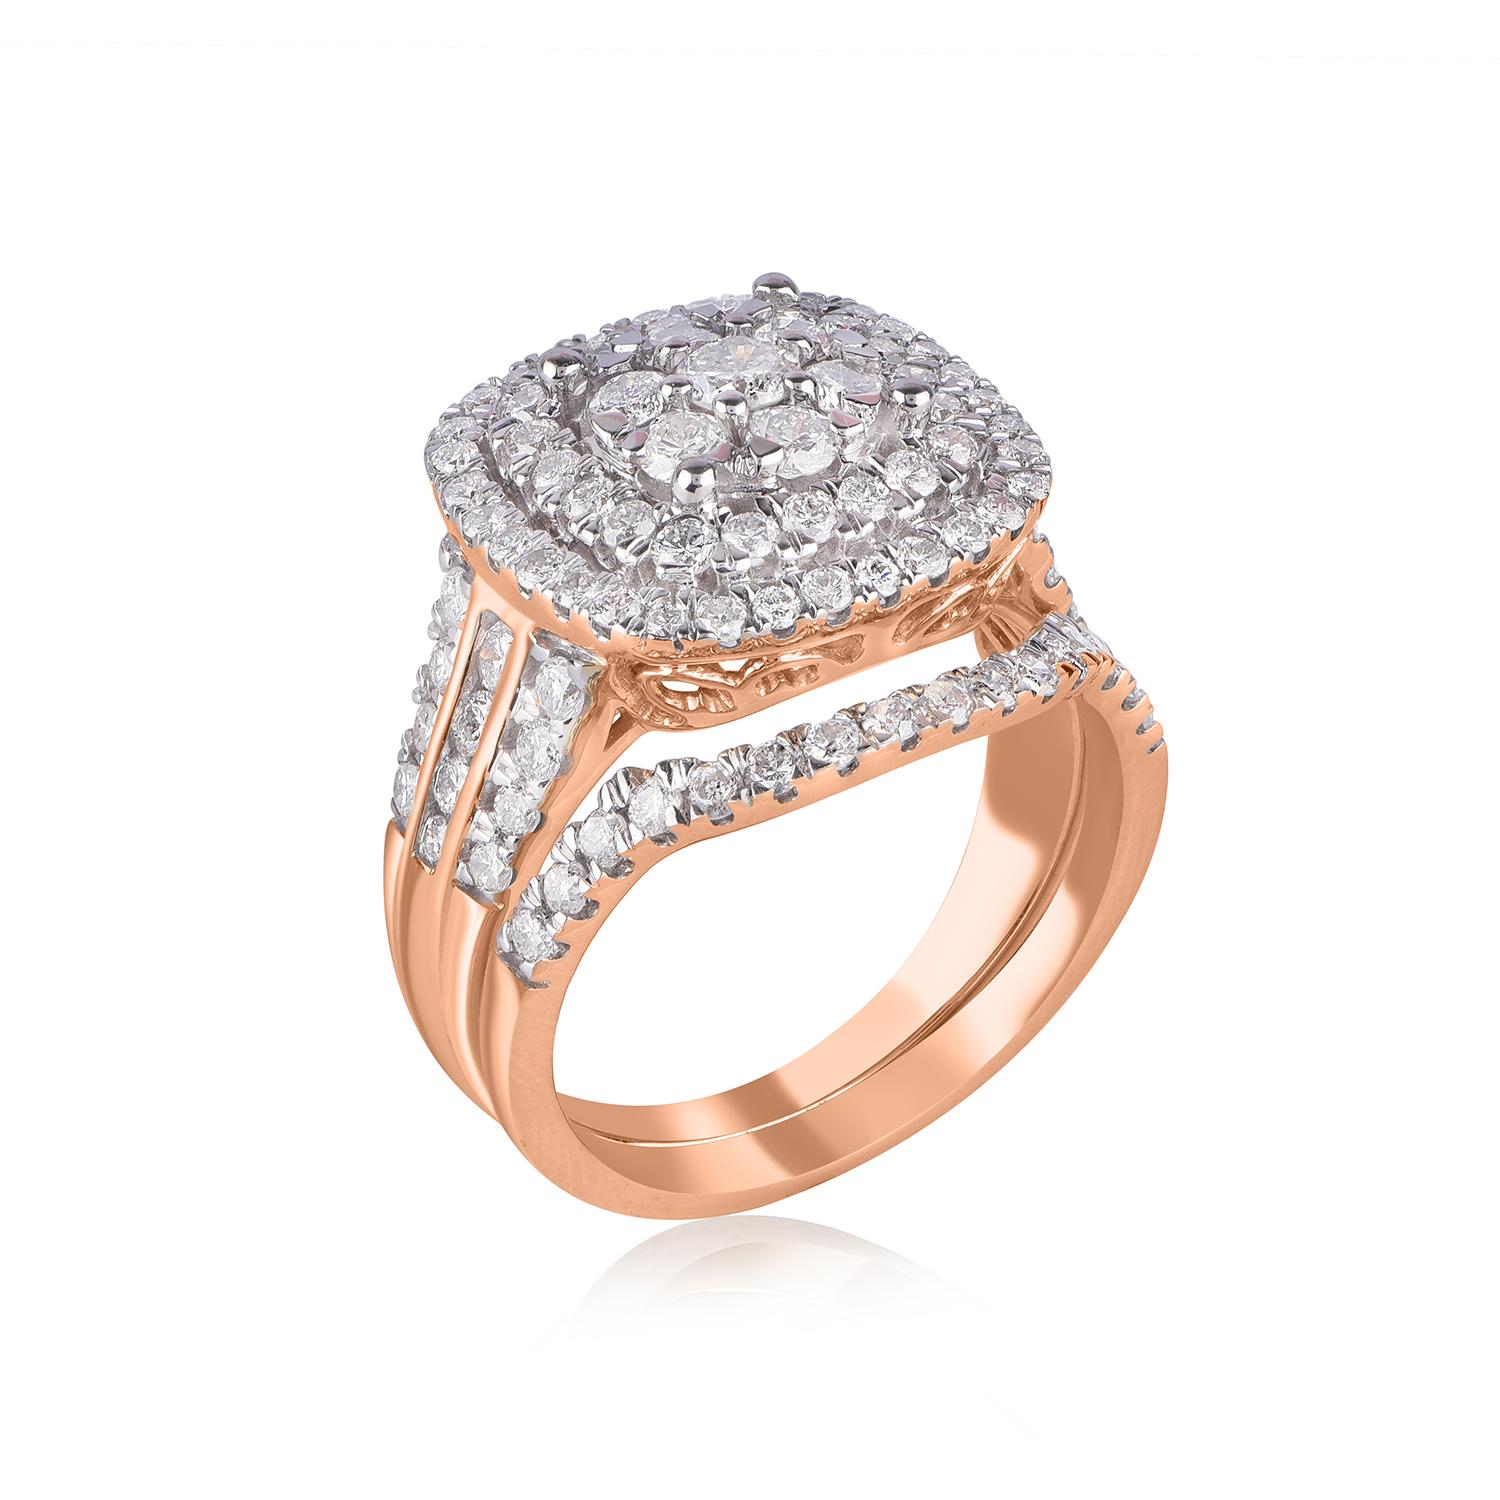 A delightful Engagement Bridal set studded with 99 diamonds in prong and channel setting. The ring is crafted in 14 Karat rose gold, diamonds are graded  H-I color I2 Clarity.
